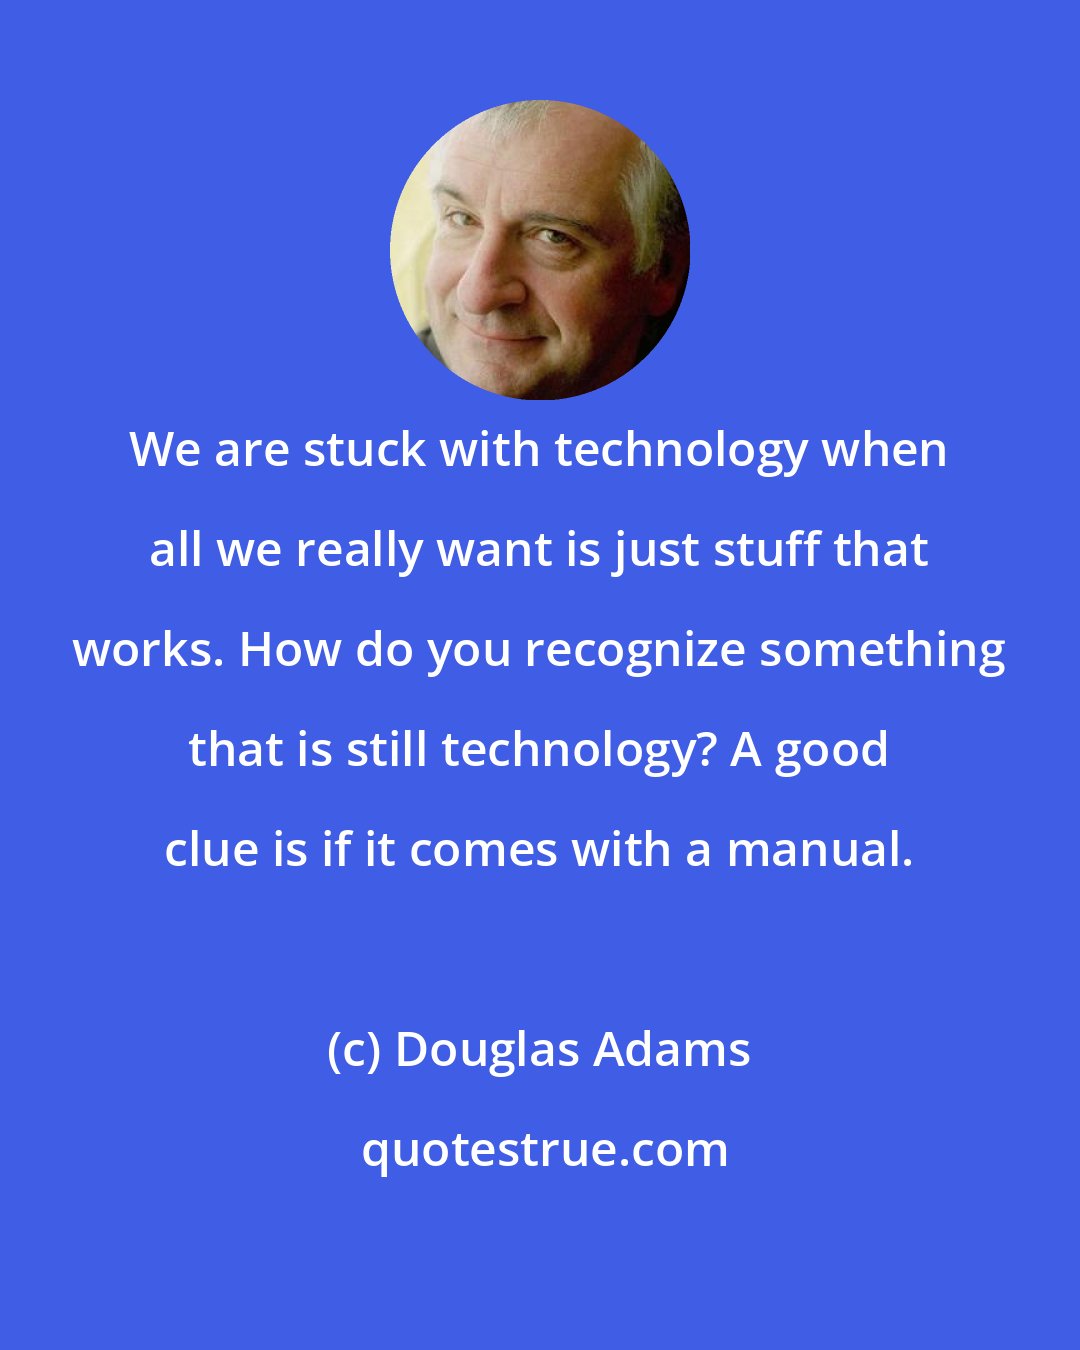 Douglas Adams: We are stuck with technology when all we really want is just stuff that works. How do you recognize something that is still technology? A good clue is if it comes with a manual.